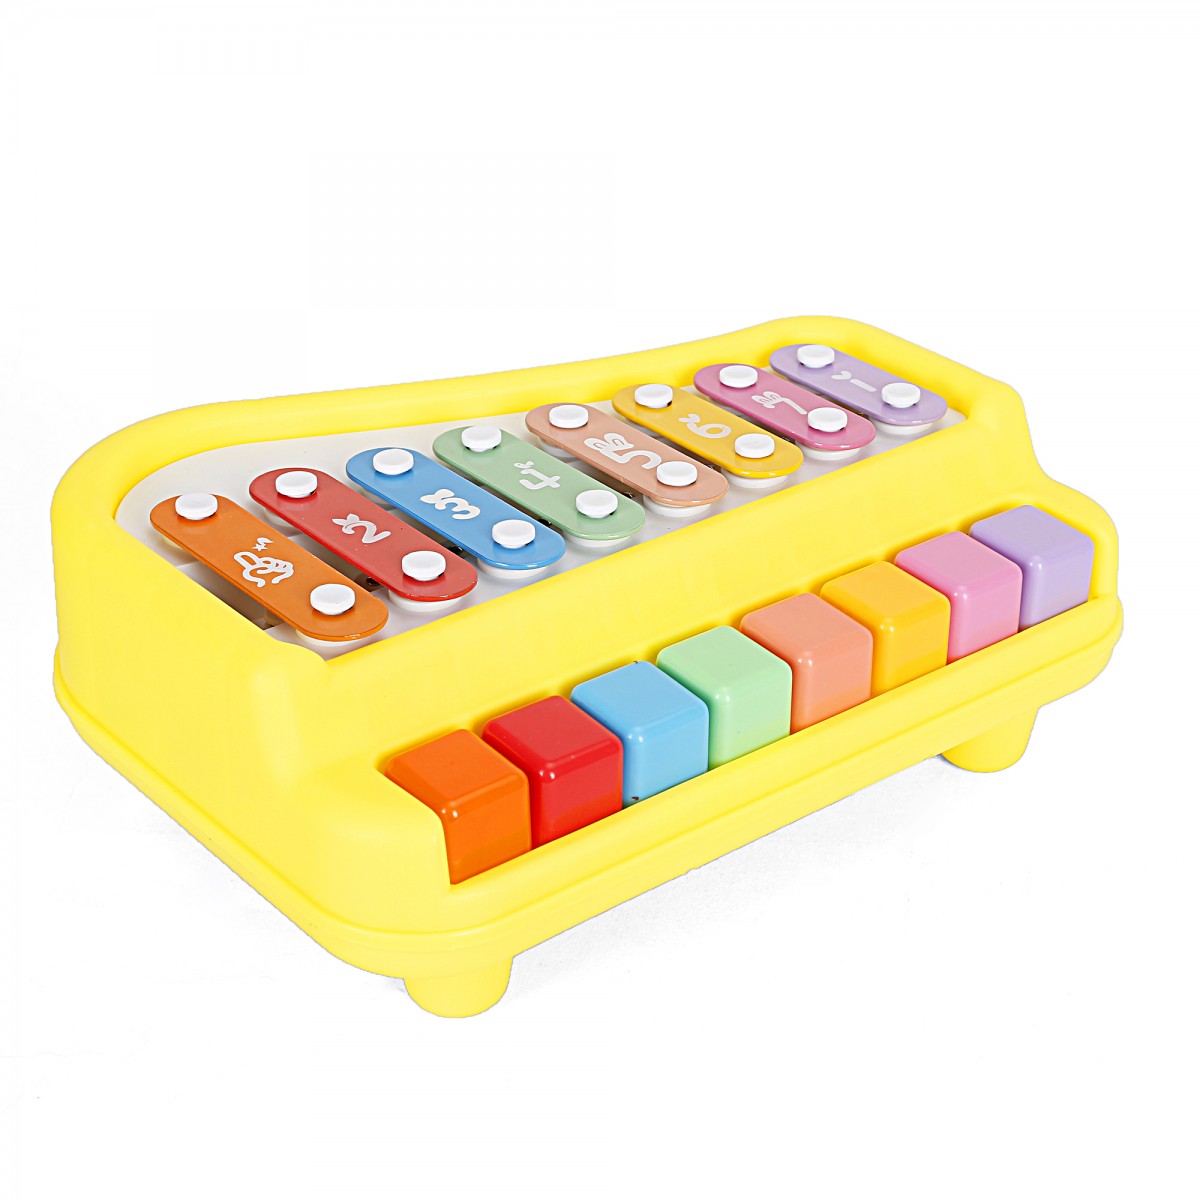 Shooting Star My Melodious Xylophone for Kids, 18M+, Yellow